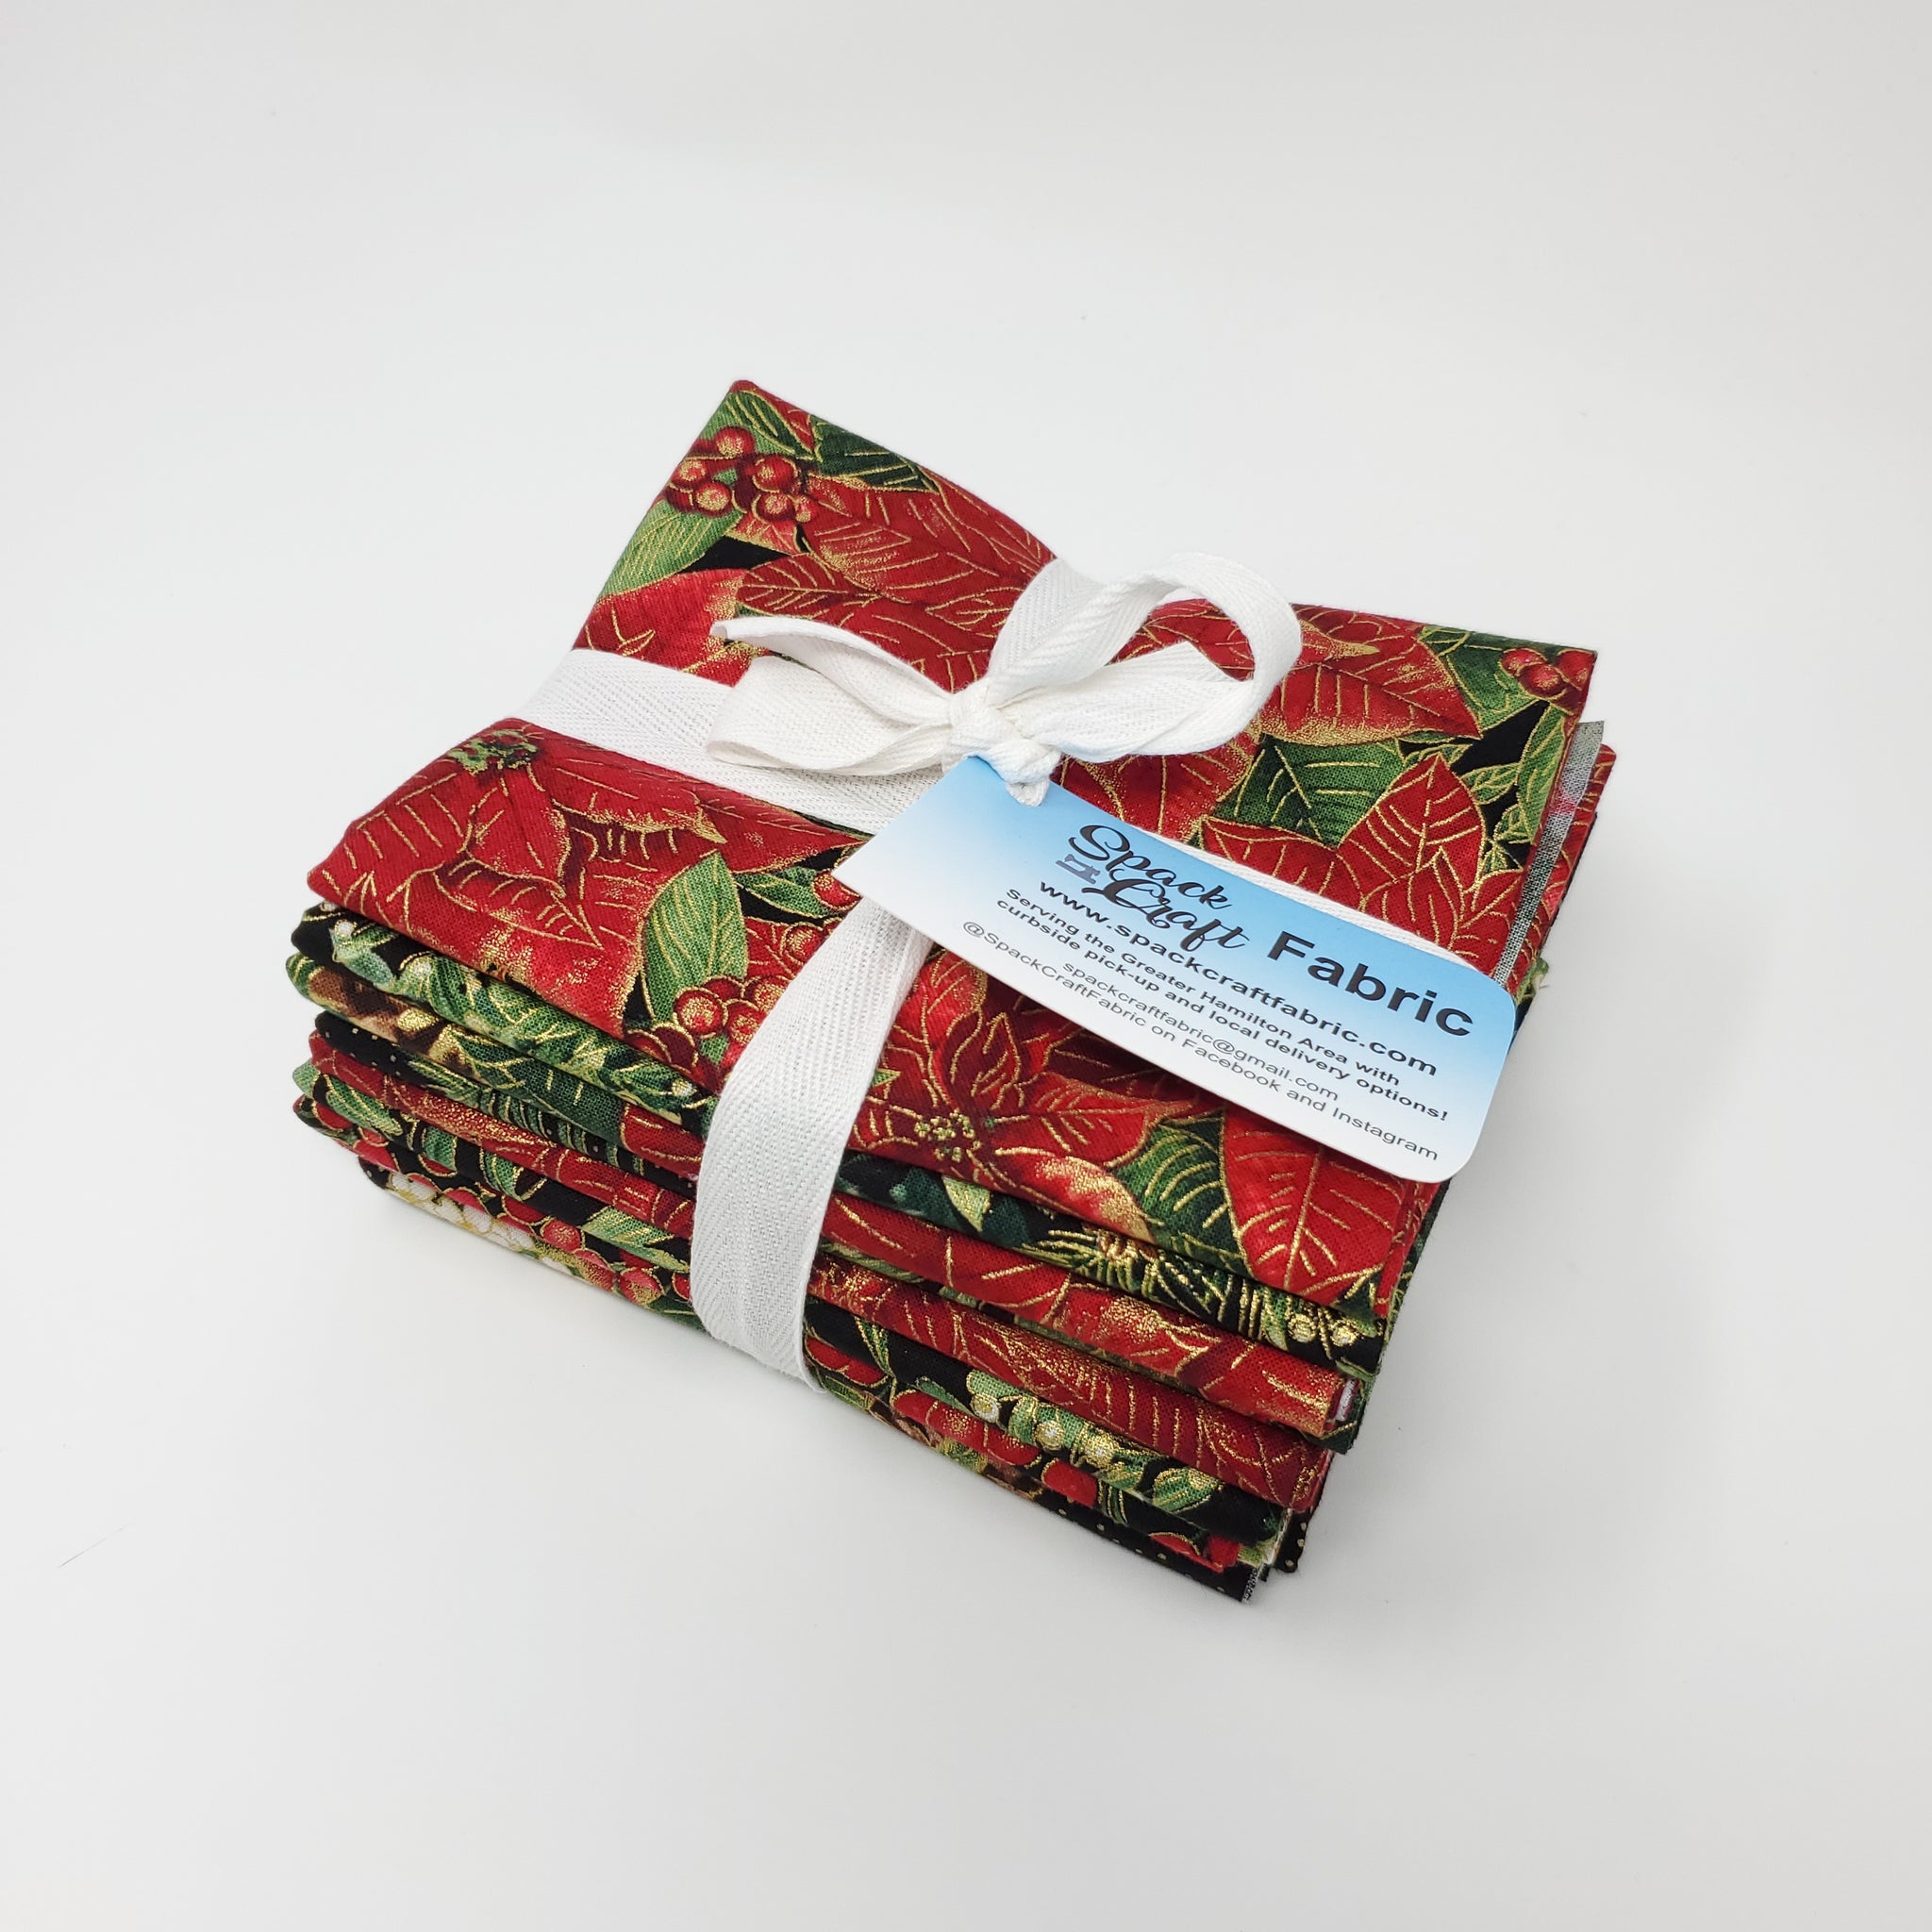 Hand-Cut Fat Quarter Bundle - Timeless Treasures - Holiday Spice (9pc)